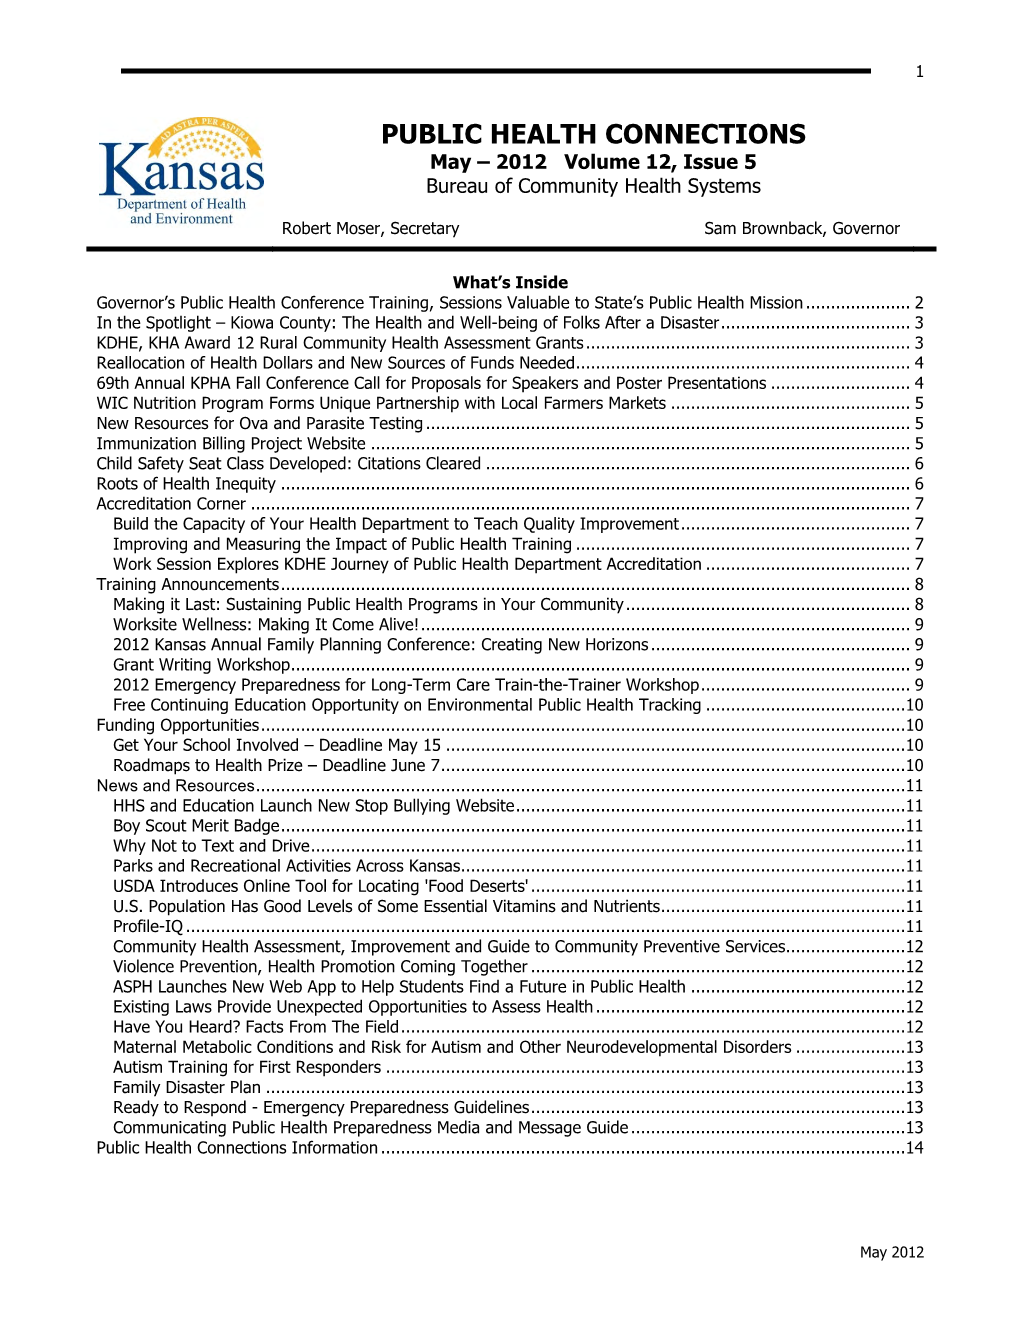 PUBLIC HEALTH CONNECTIONS May – 2012 Volume 12, Issue 5 Bureau of Community Health Systems